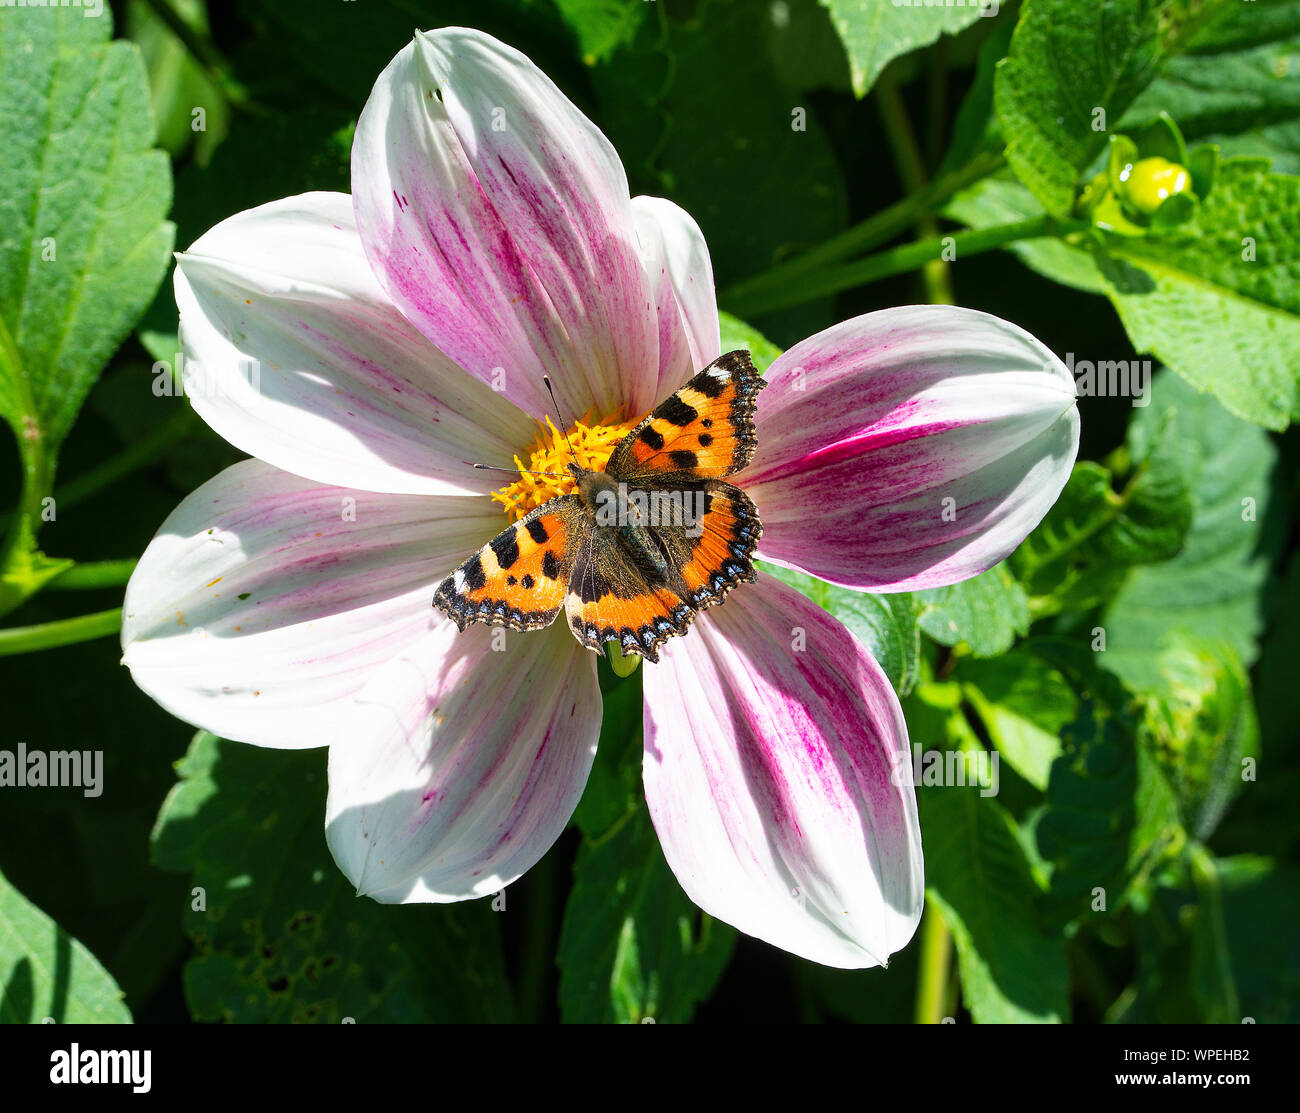 A Small Tortoiseshell Butterfly Sunbathing and Feeding on a White and Purple Dahlia Flower in a Garden in Alsager Cheshire England United Kingdom UK Stock Photo